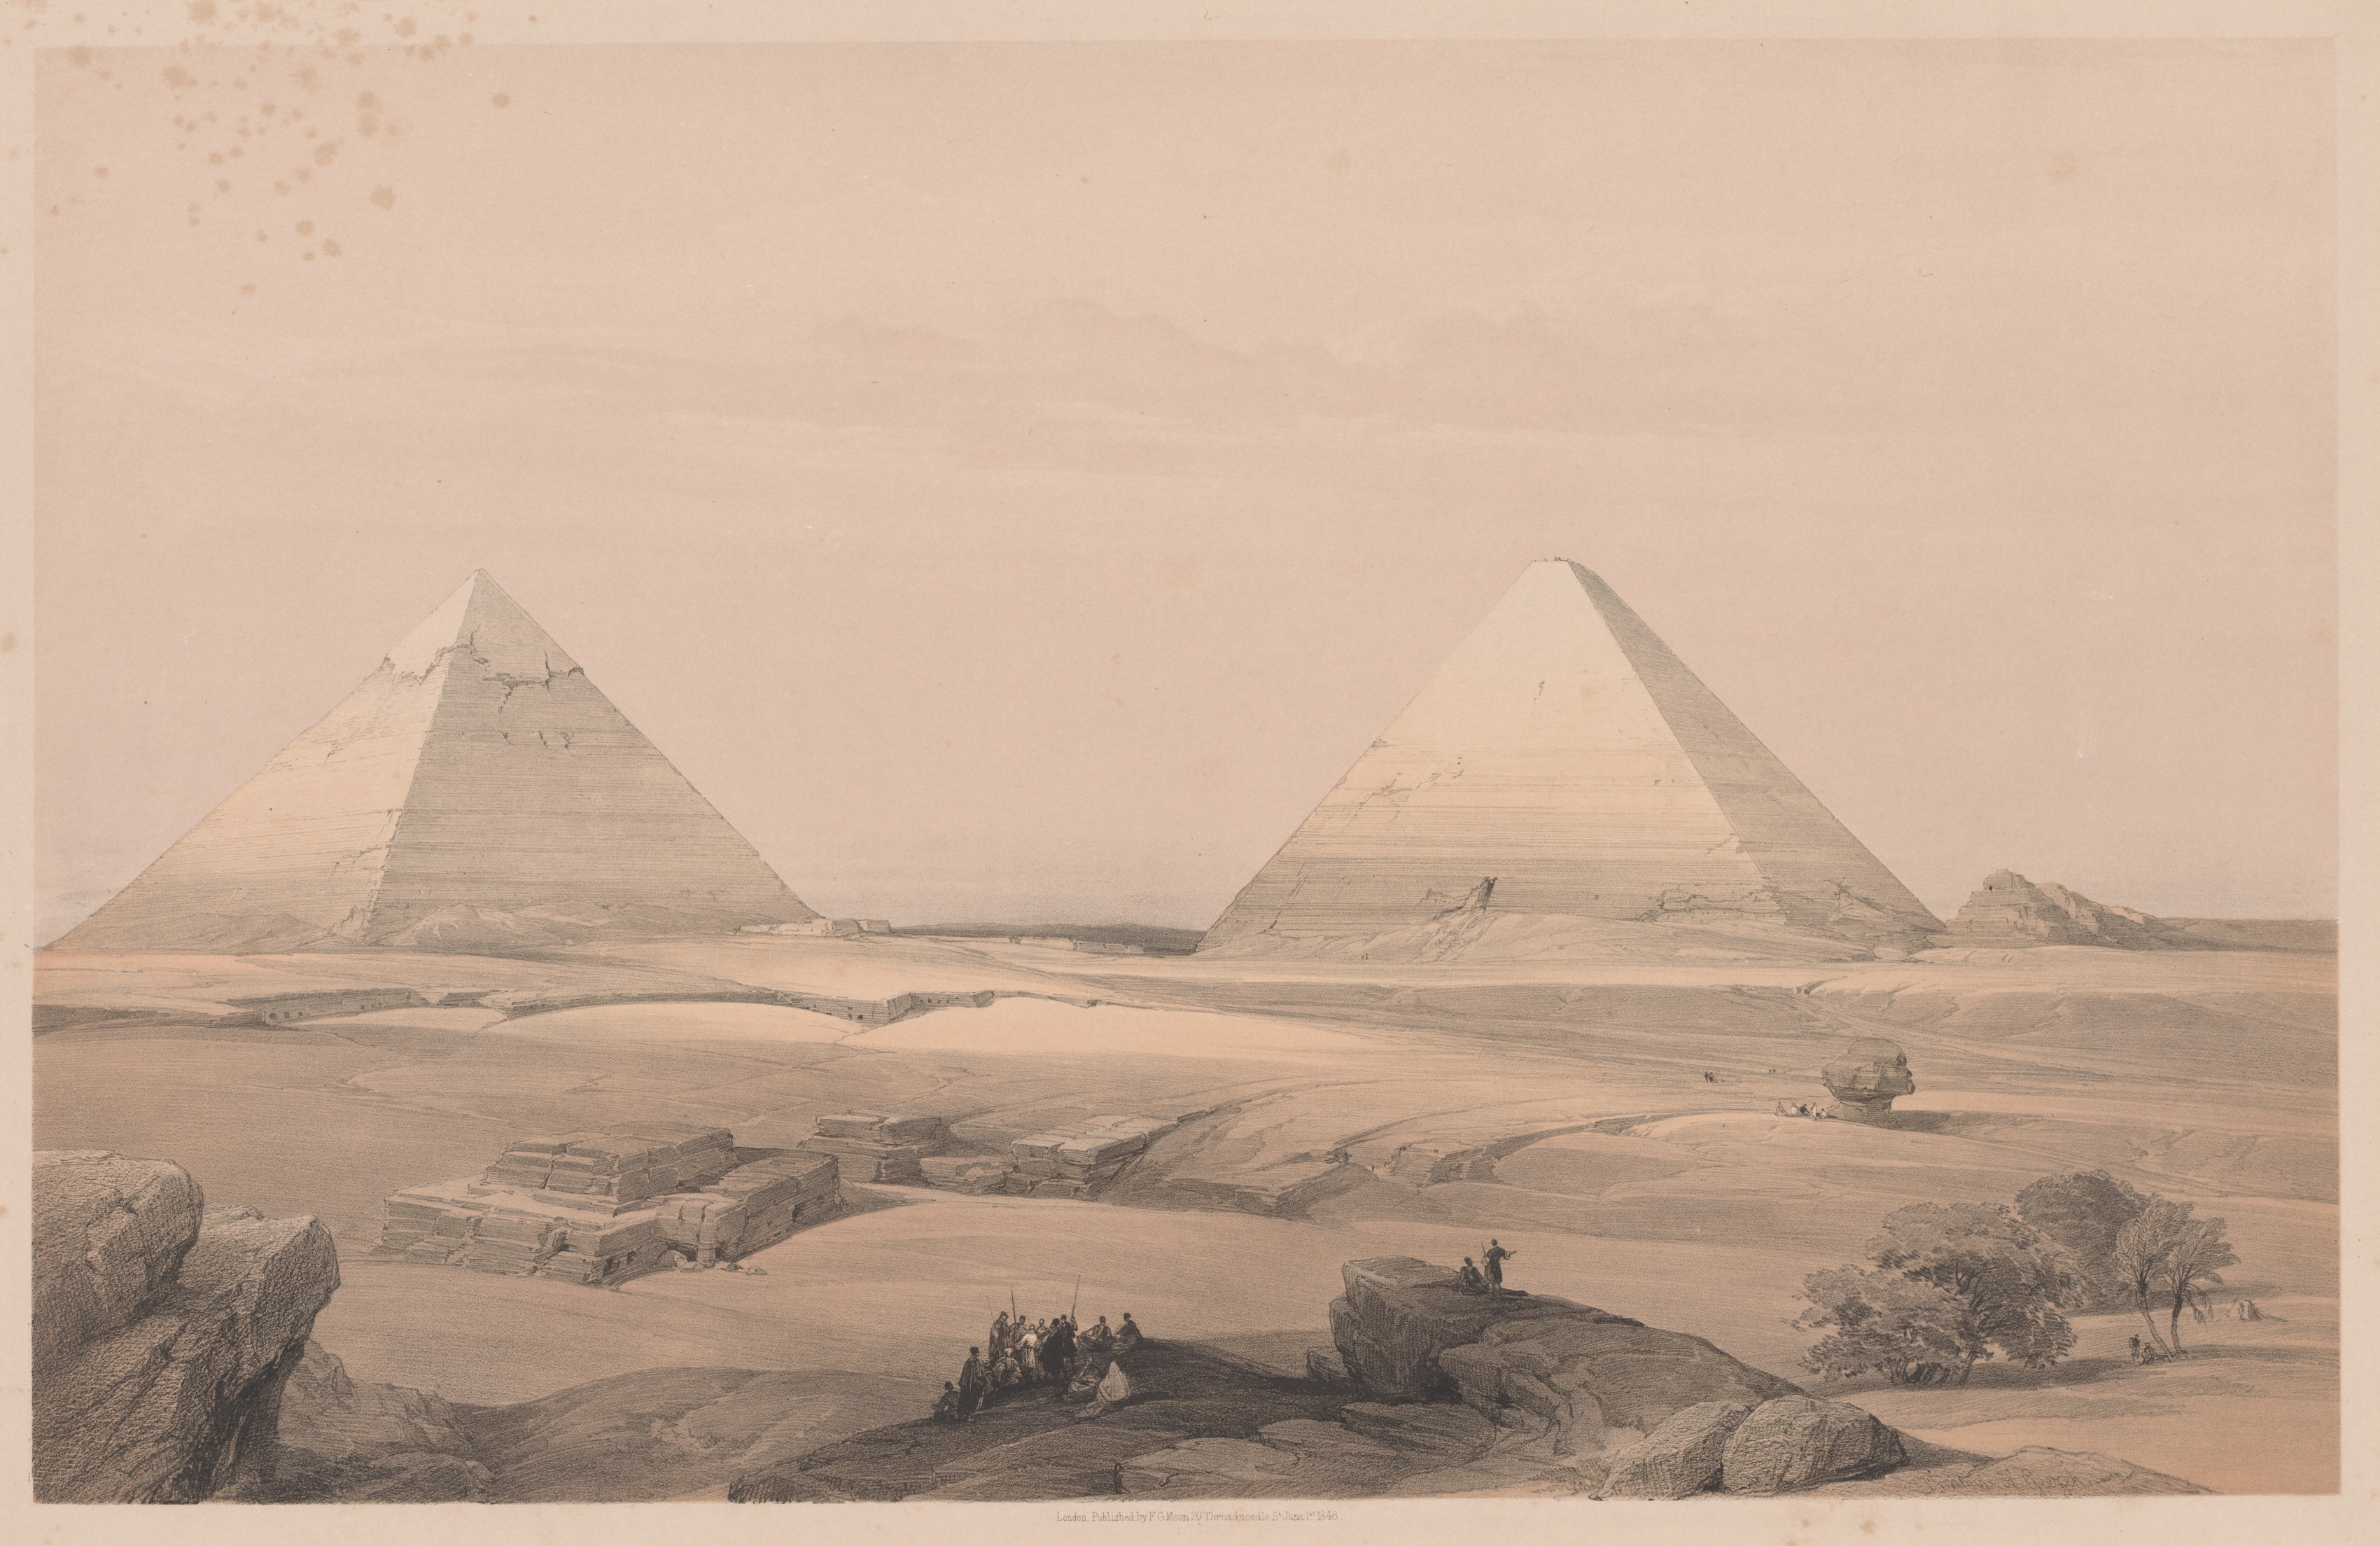 Egypt and Nubia:  Volume I - No. 3, Pyramids of Gizeh